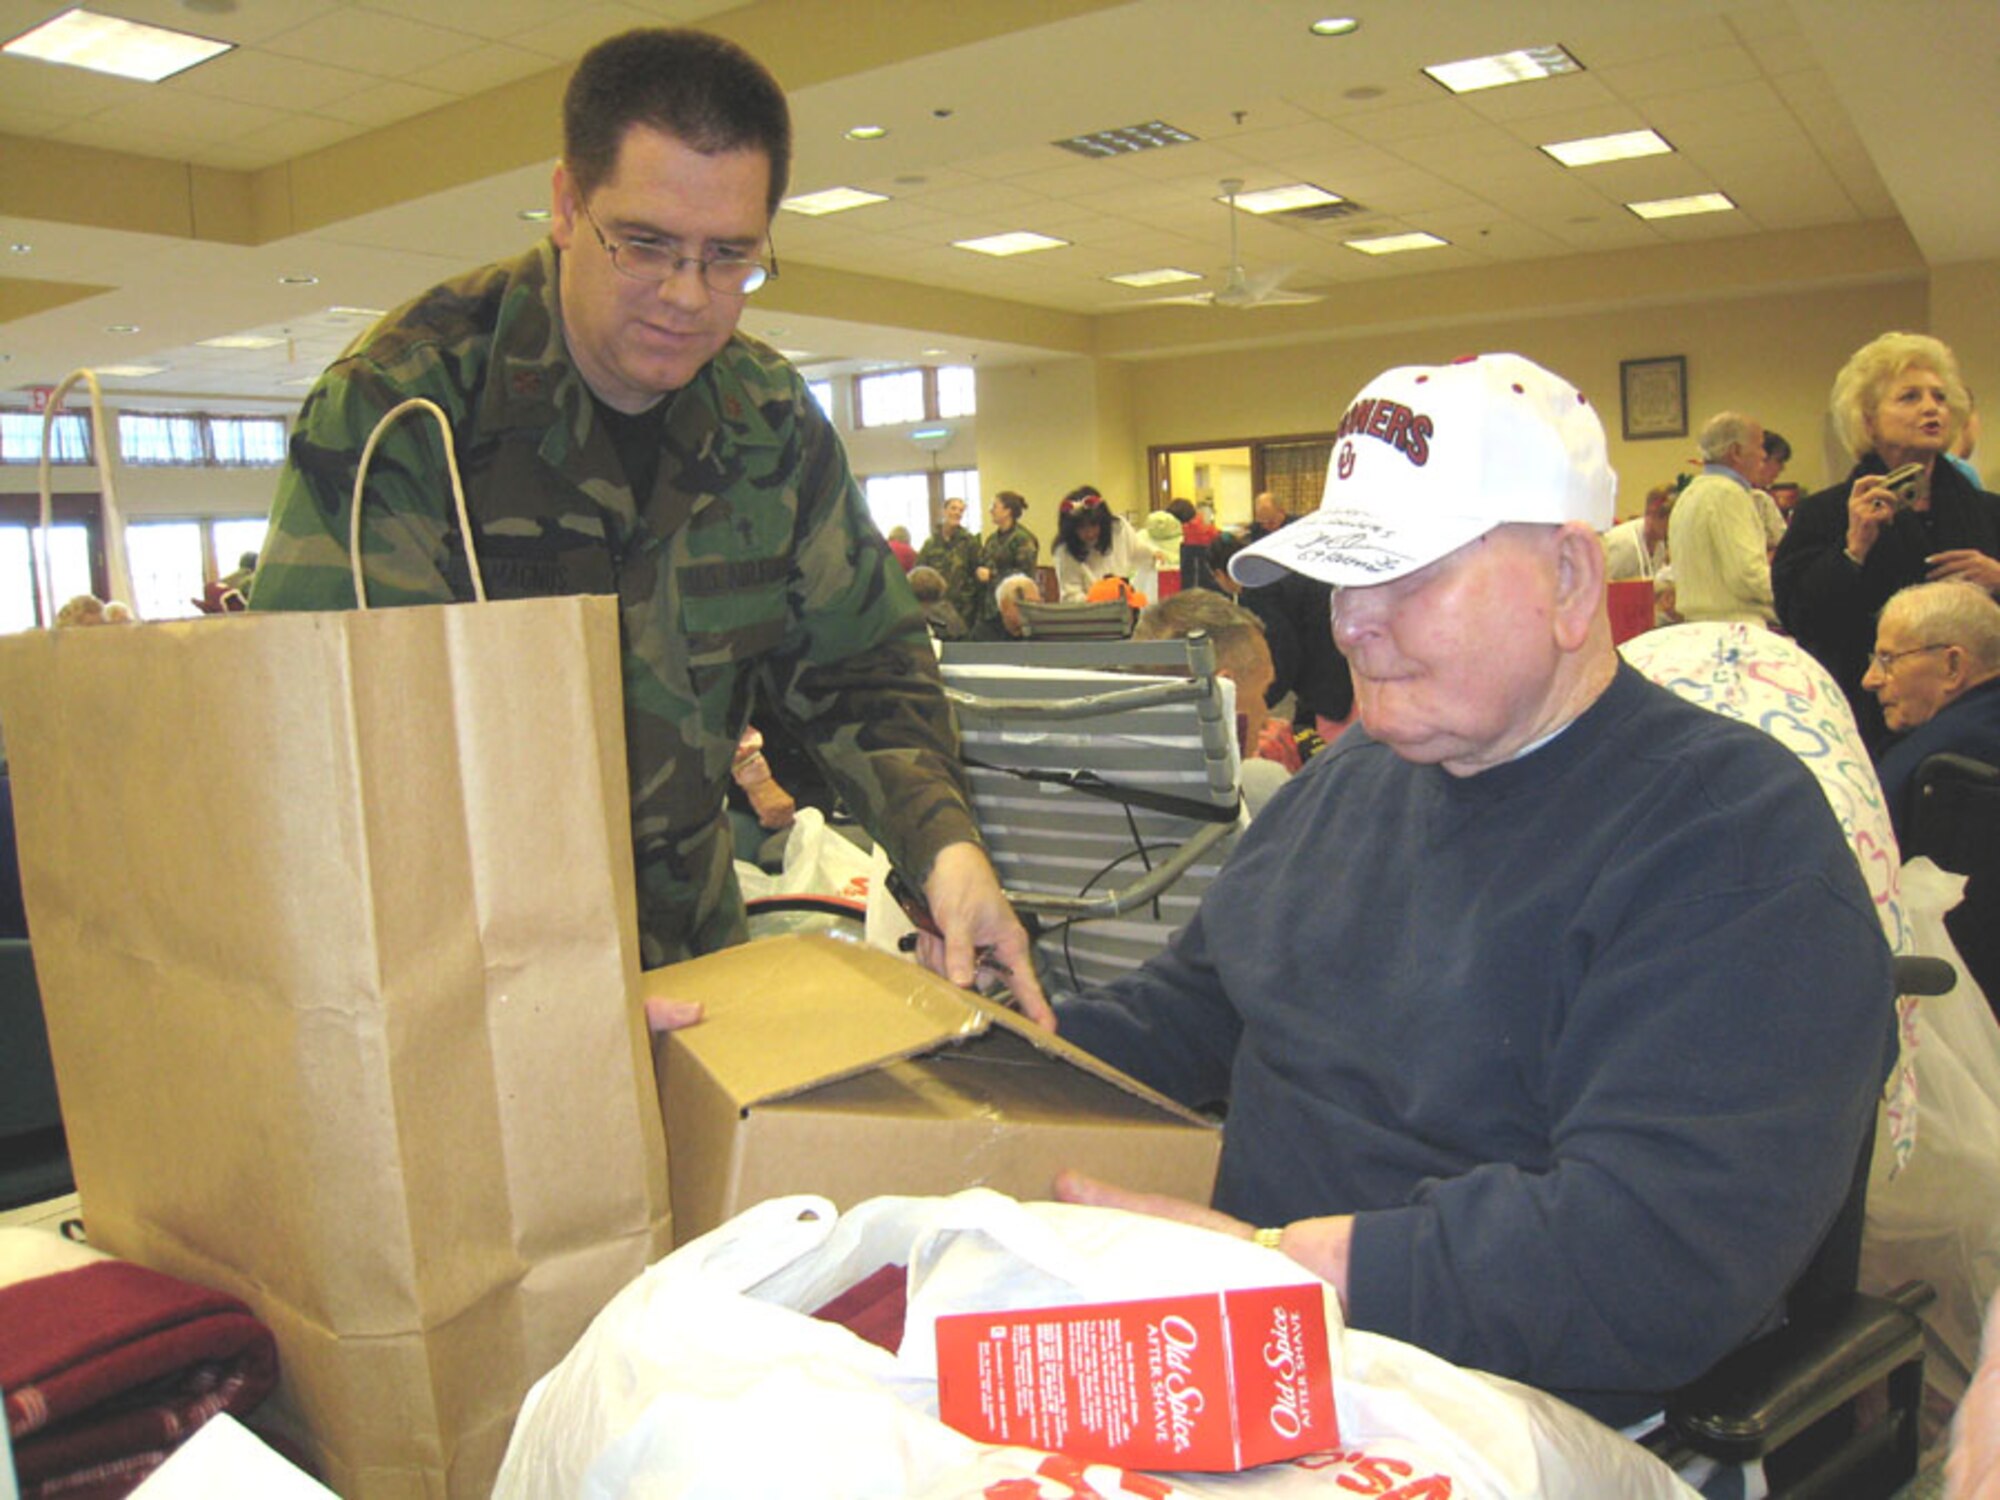 507th Air Refueling Wing Chaplain (Maj.) Dwight Magnus assists one of the Veteran Center residents in opening up his Christmas presents.  Reservists gathered and presented gifts for 294 Center residents.